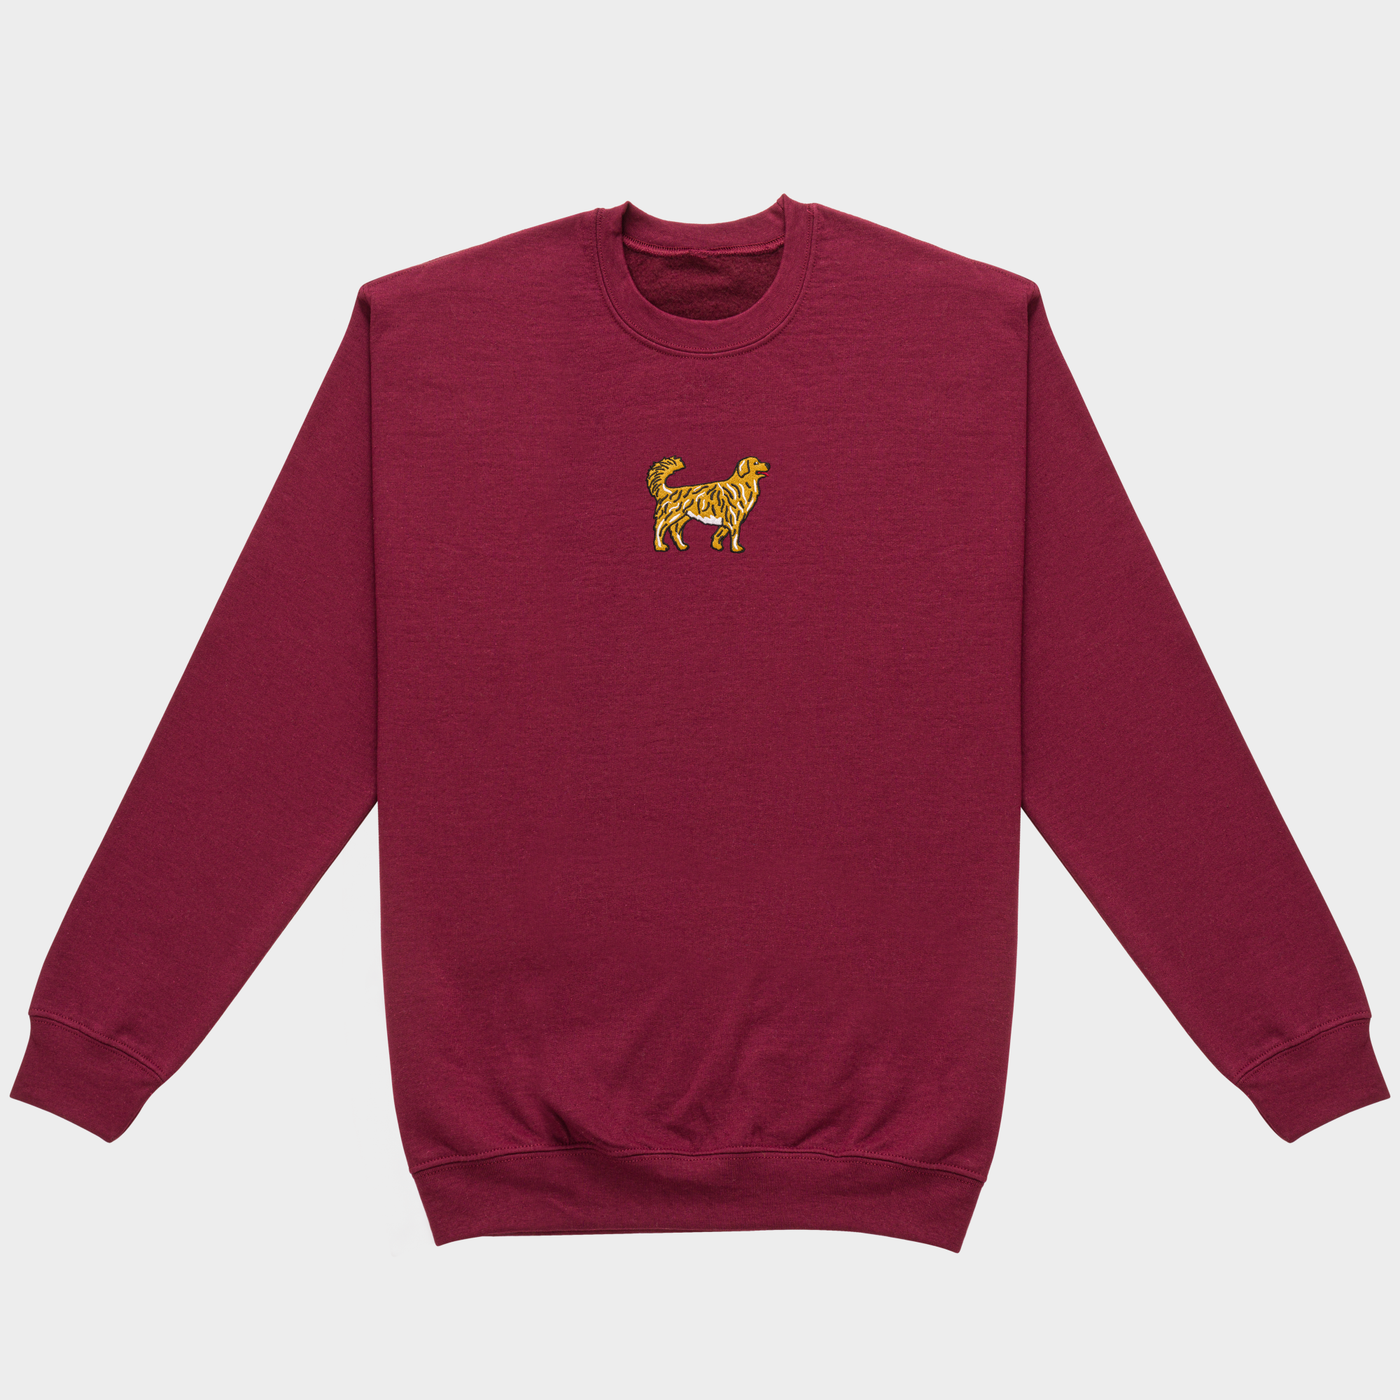 Bobby's Planet Men's Embroidered Golden Retriever Sweatshirt from Paws Dog Cat Animals Collection in Maroon Color#color_maroon